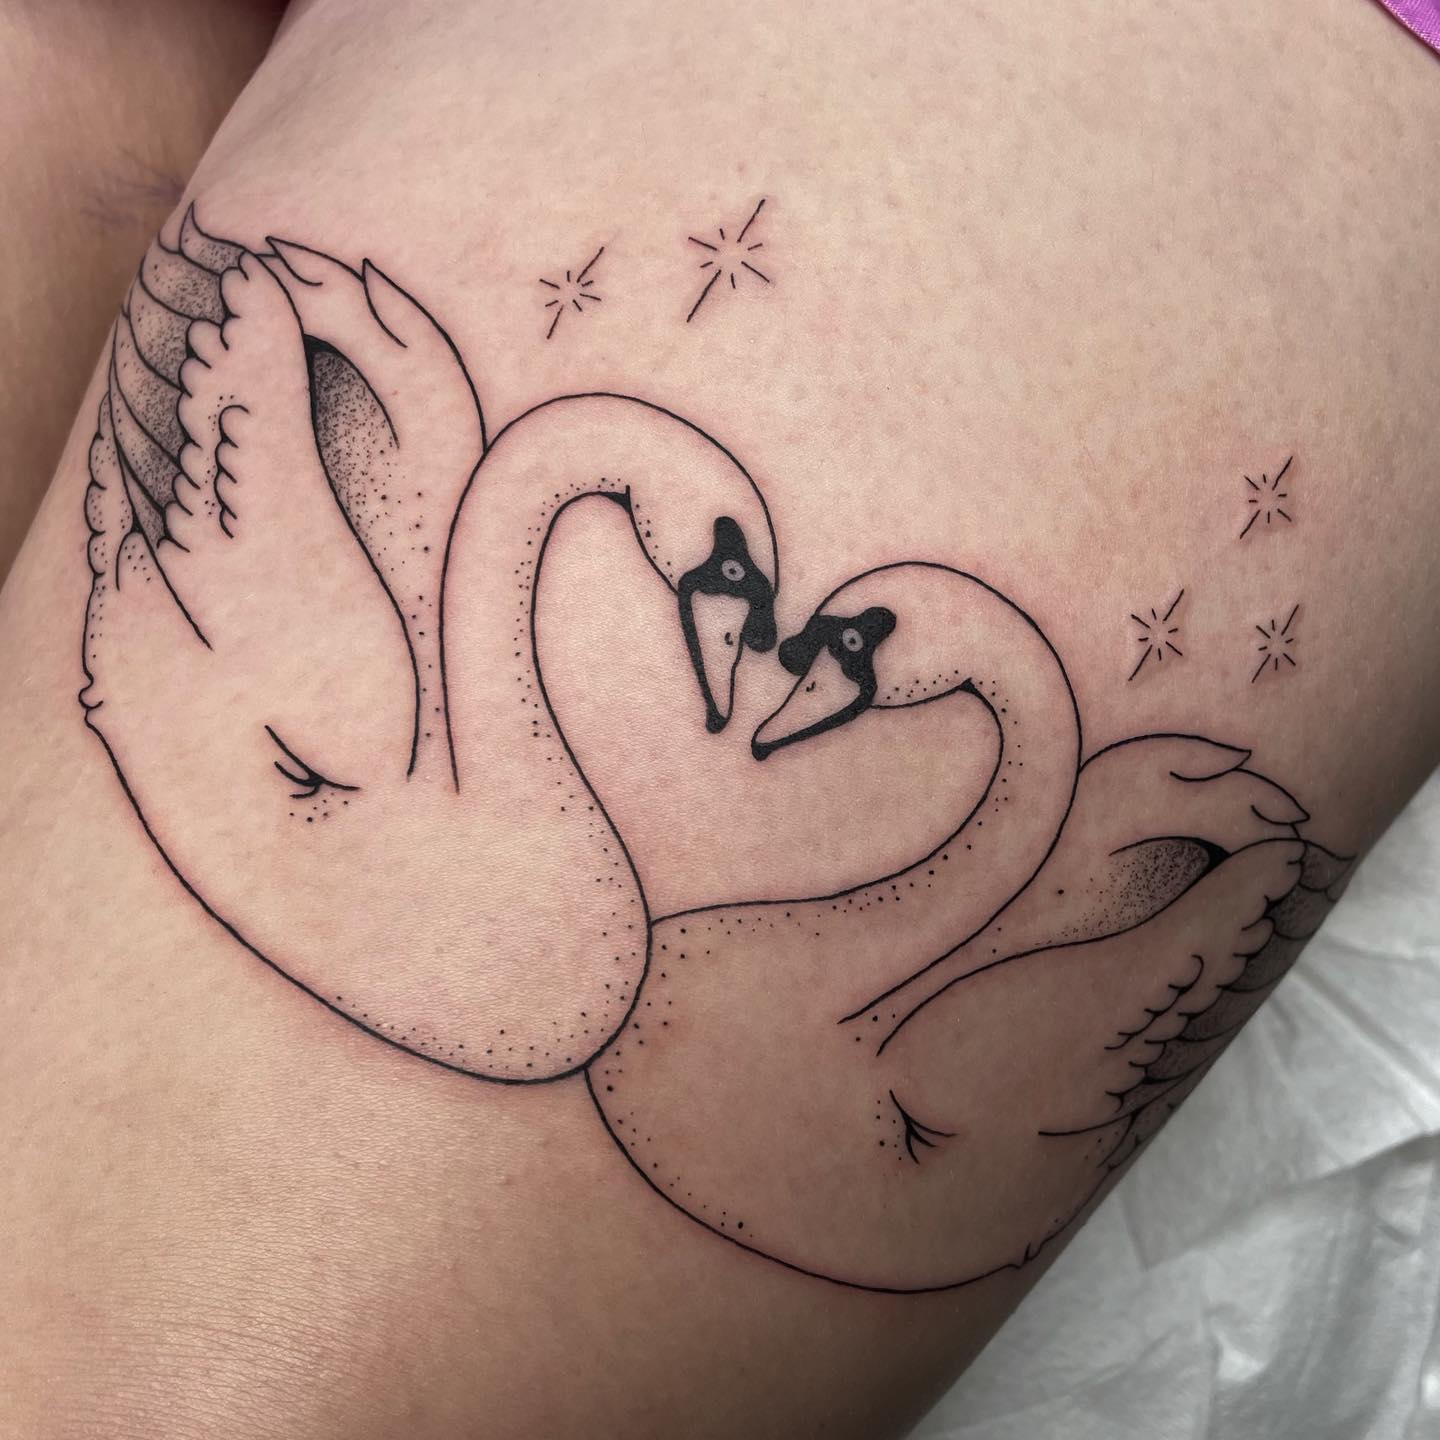 Swan tattoo on thigh by autumntattoos